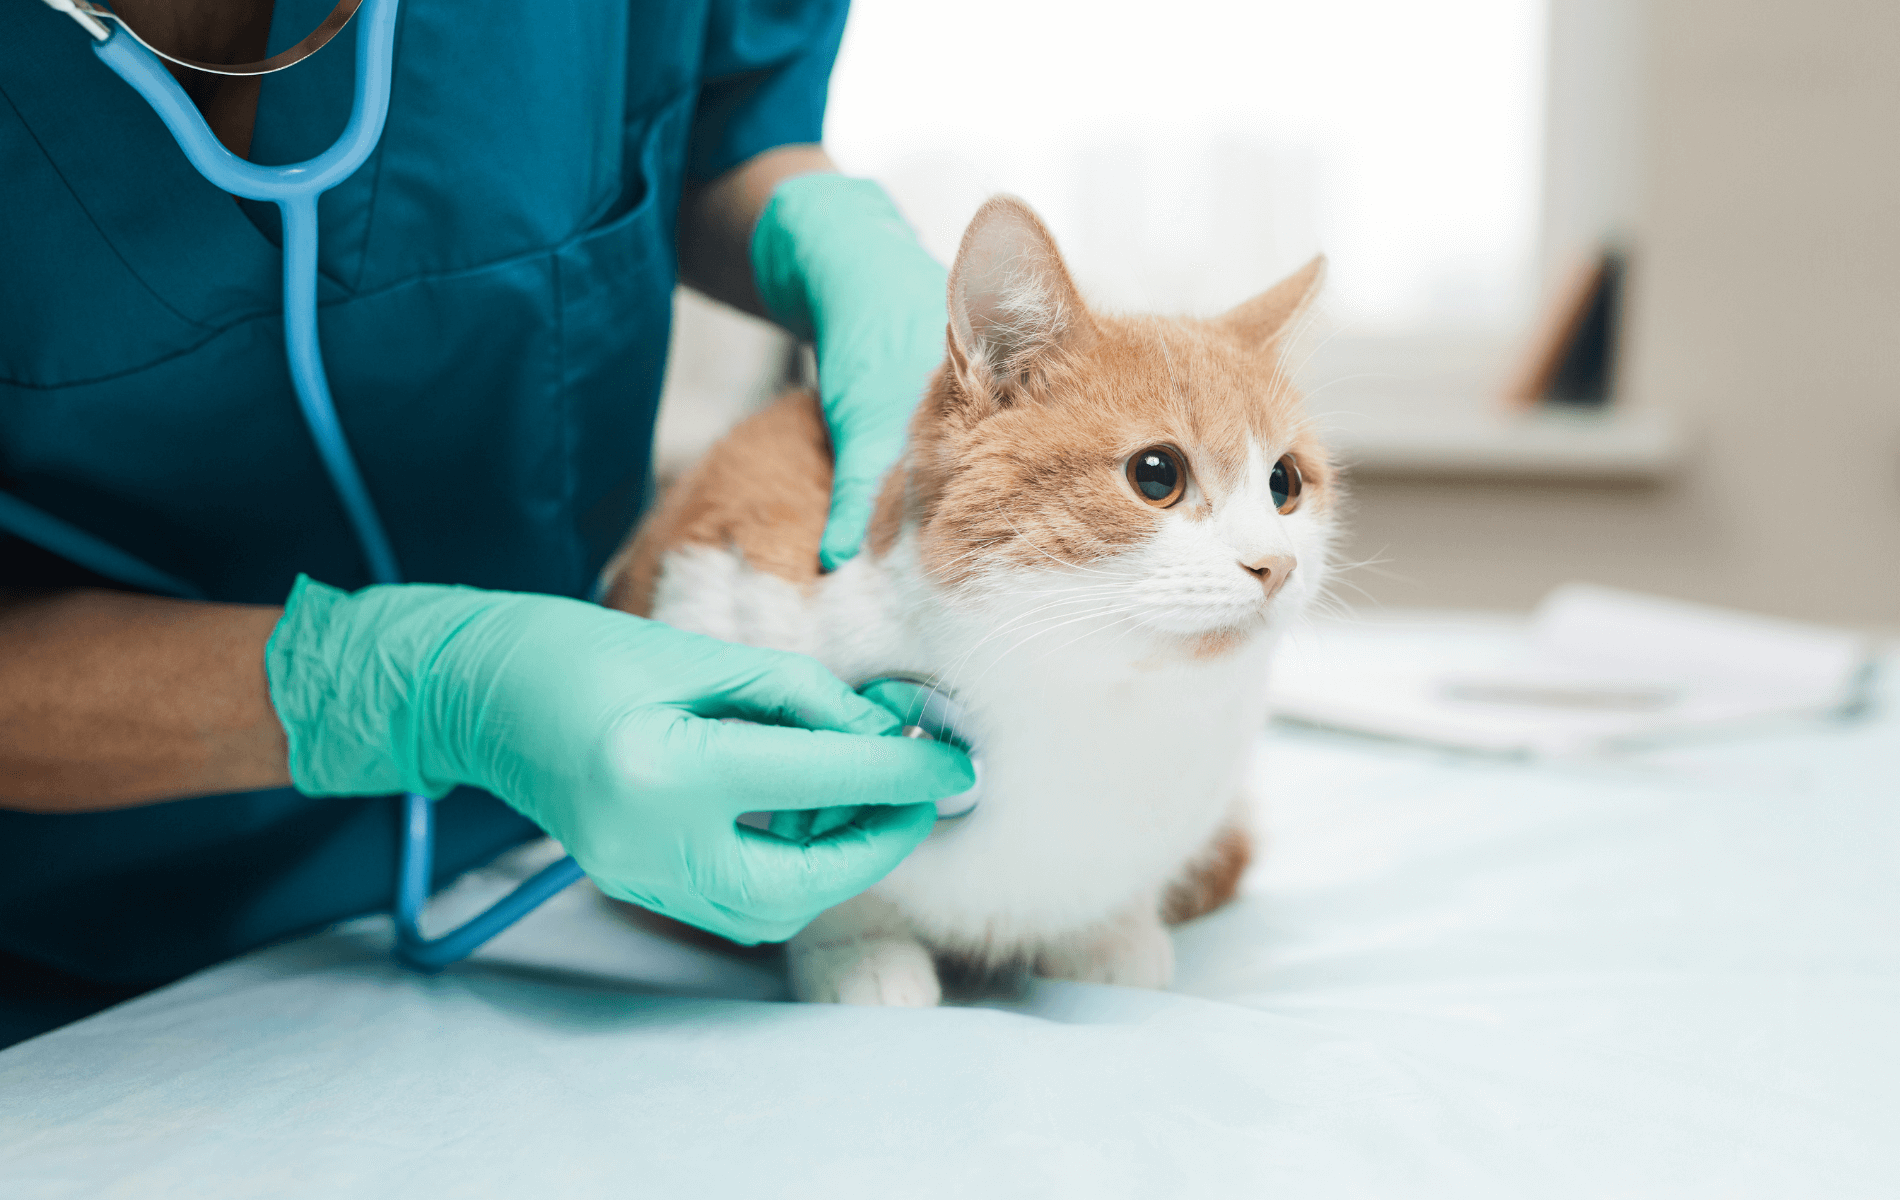 A person wearing gloves and holding a stethoscope on a cat